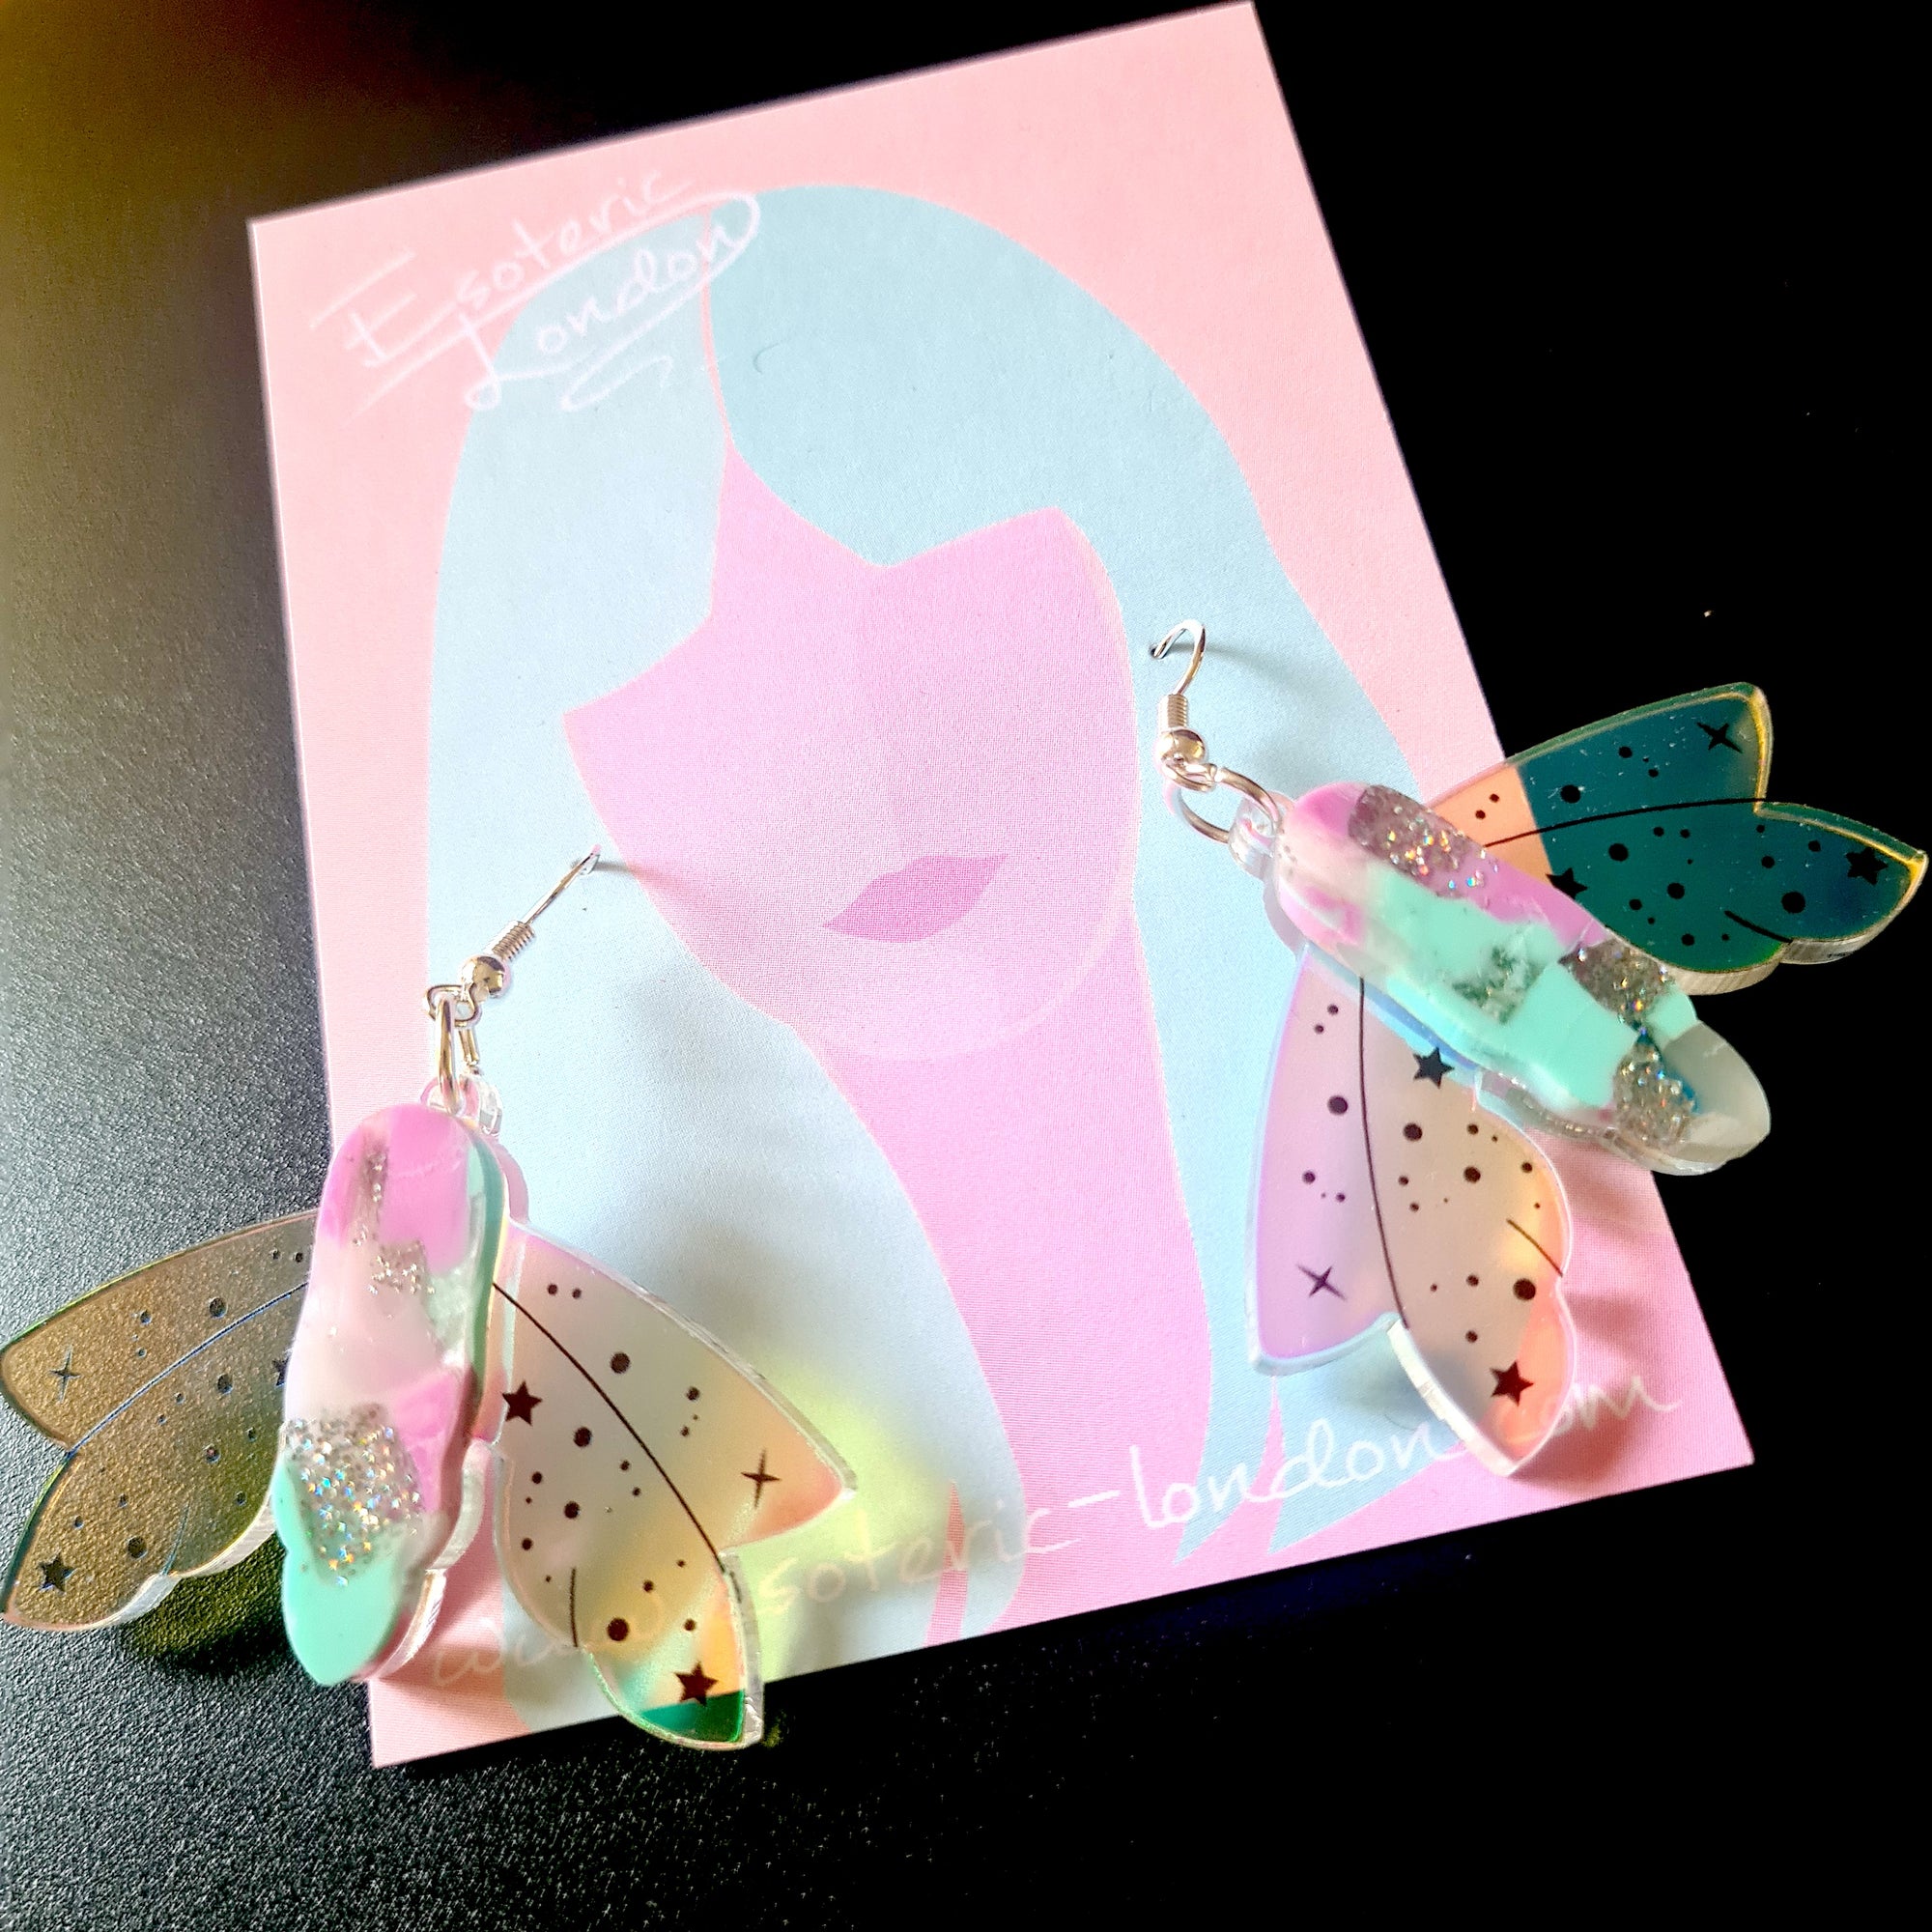 Recycled Acrylic Celestial Moth Earrings by Esoteric London ( Pink/Turquoise)